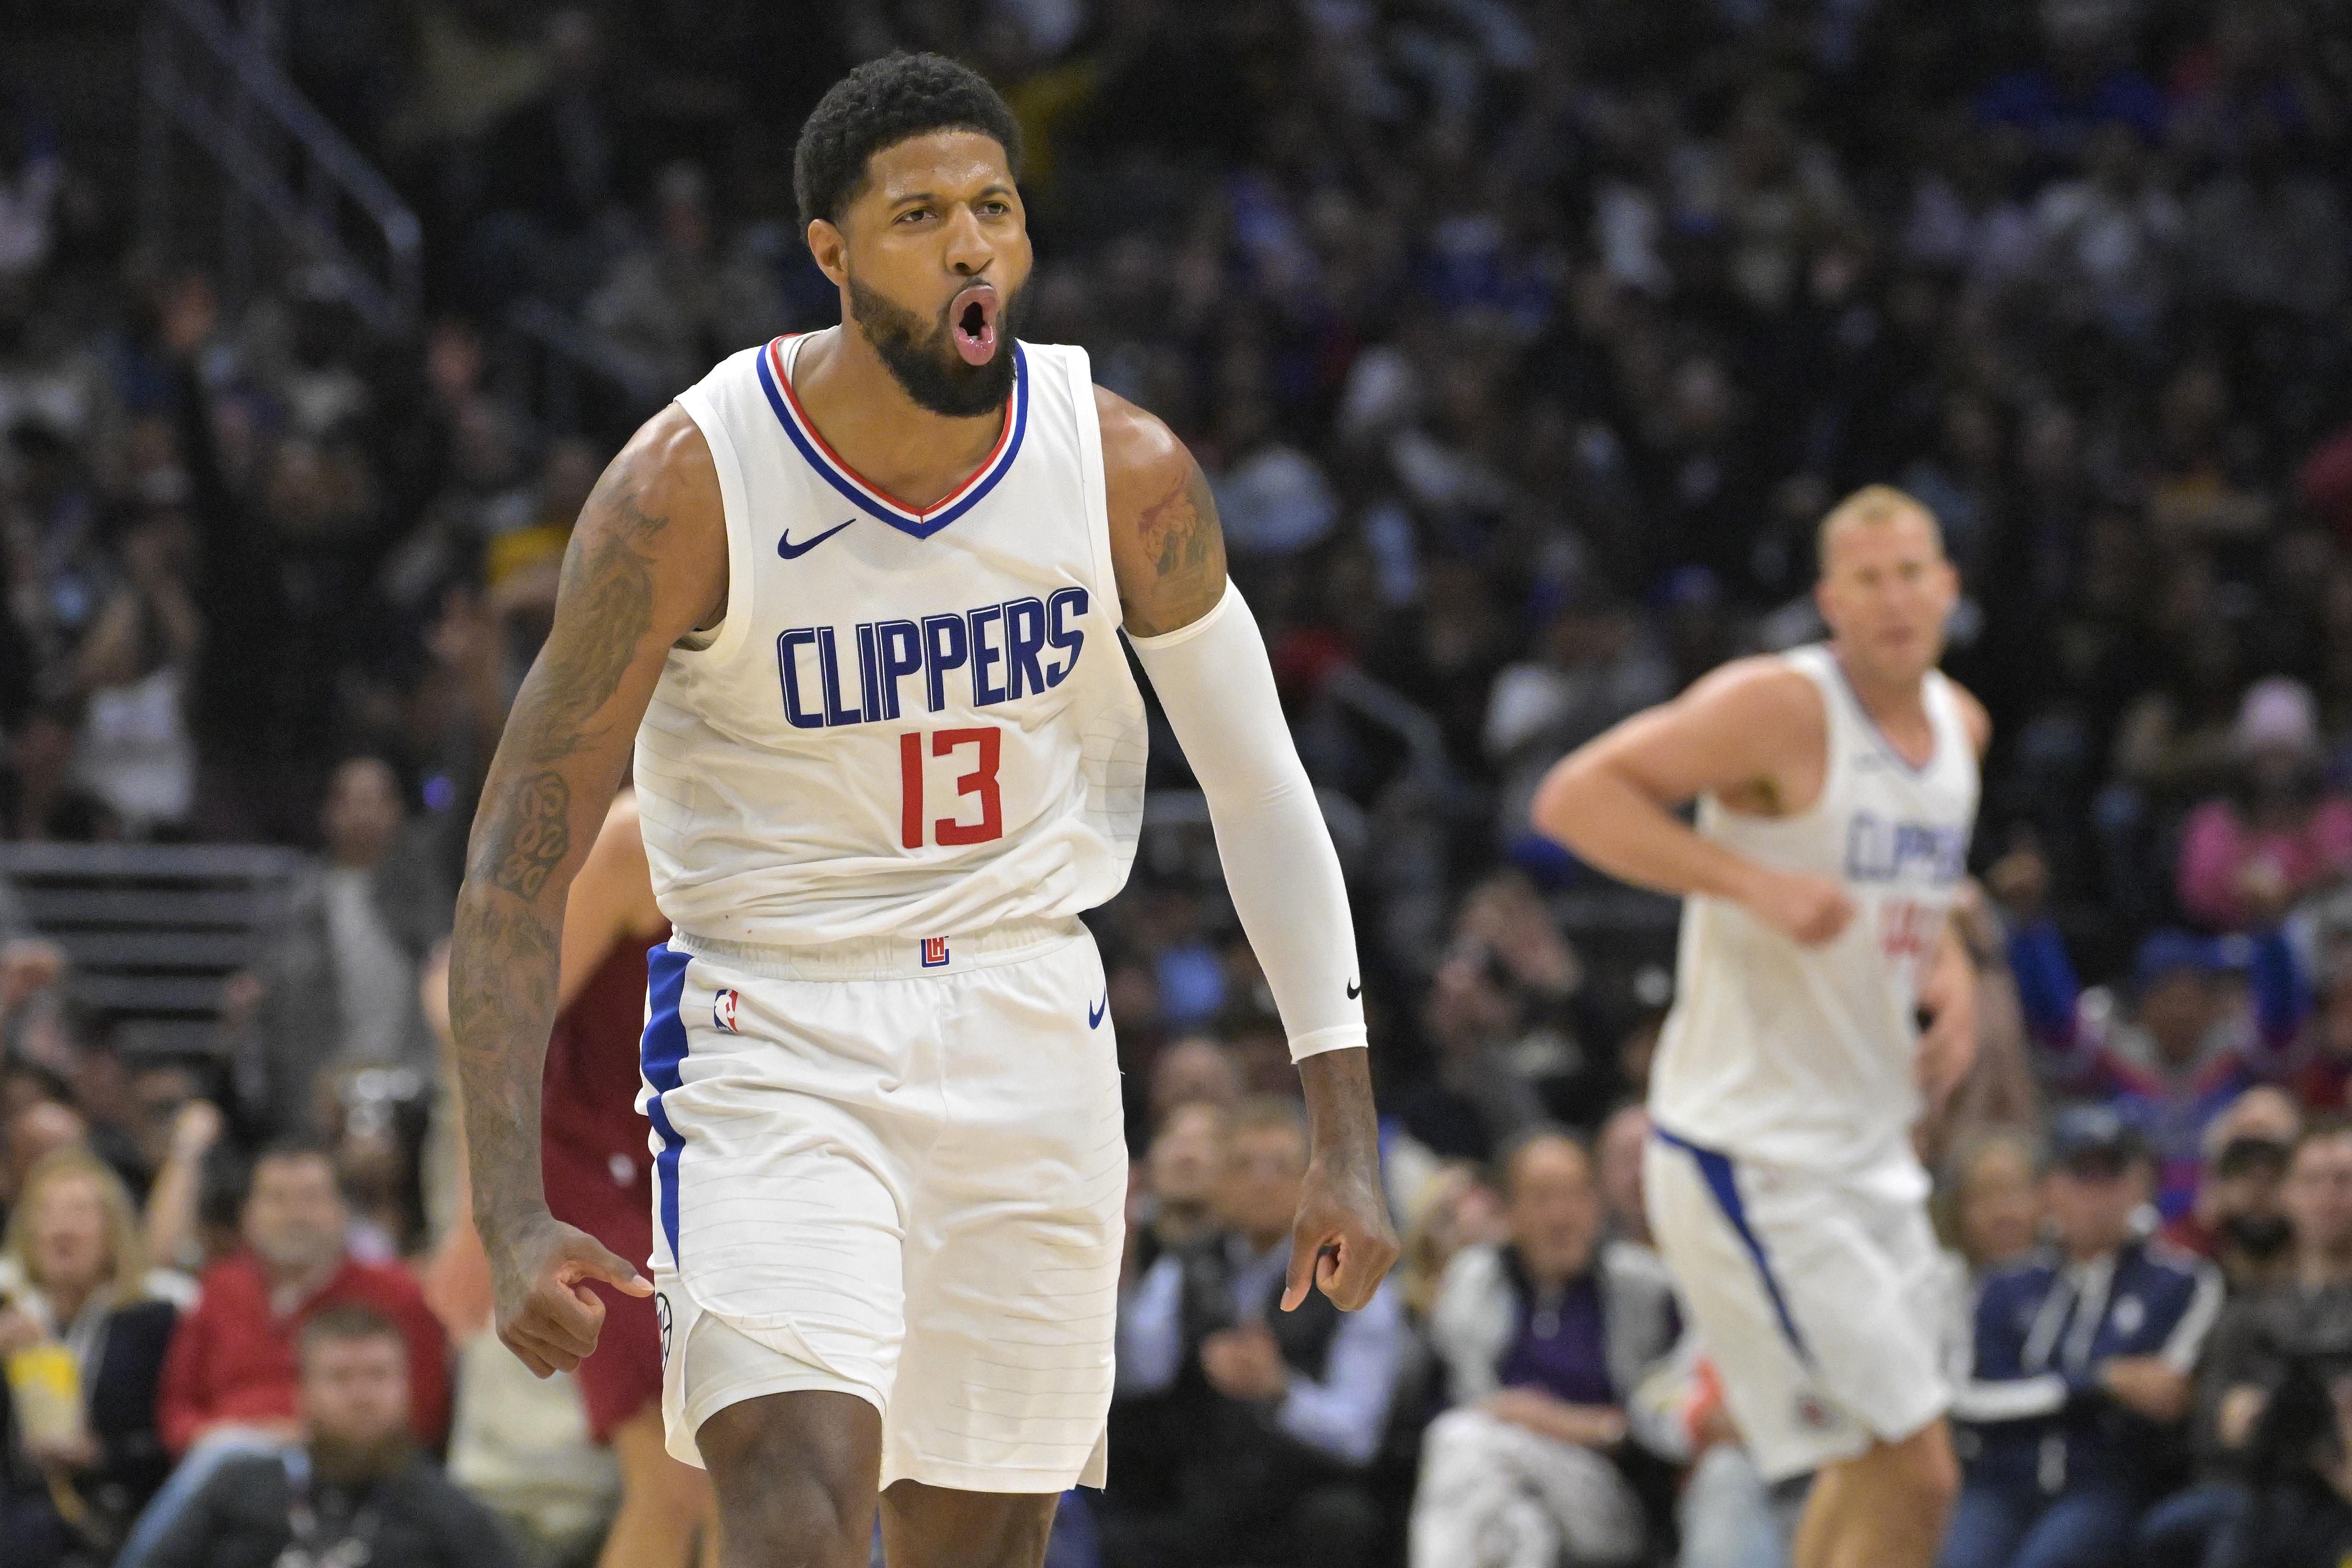 NBA: Cleveland Cavaliers at Los Angeles Clippers, knicks